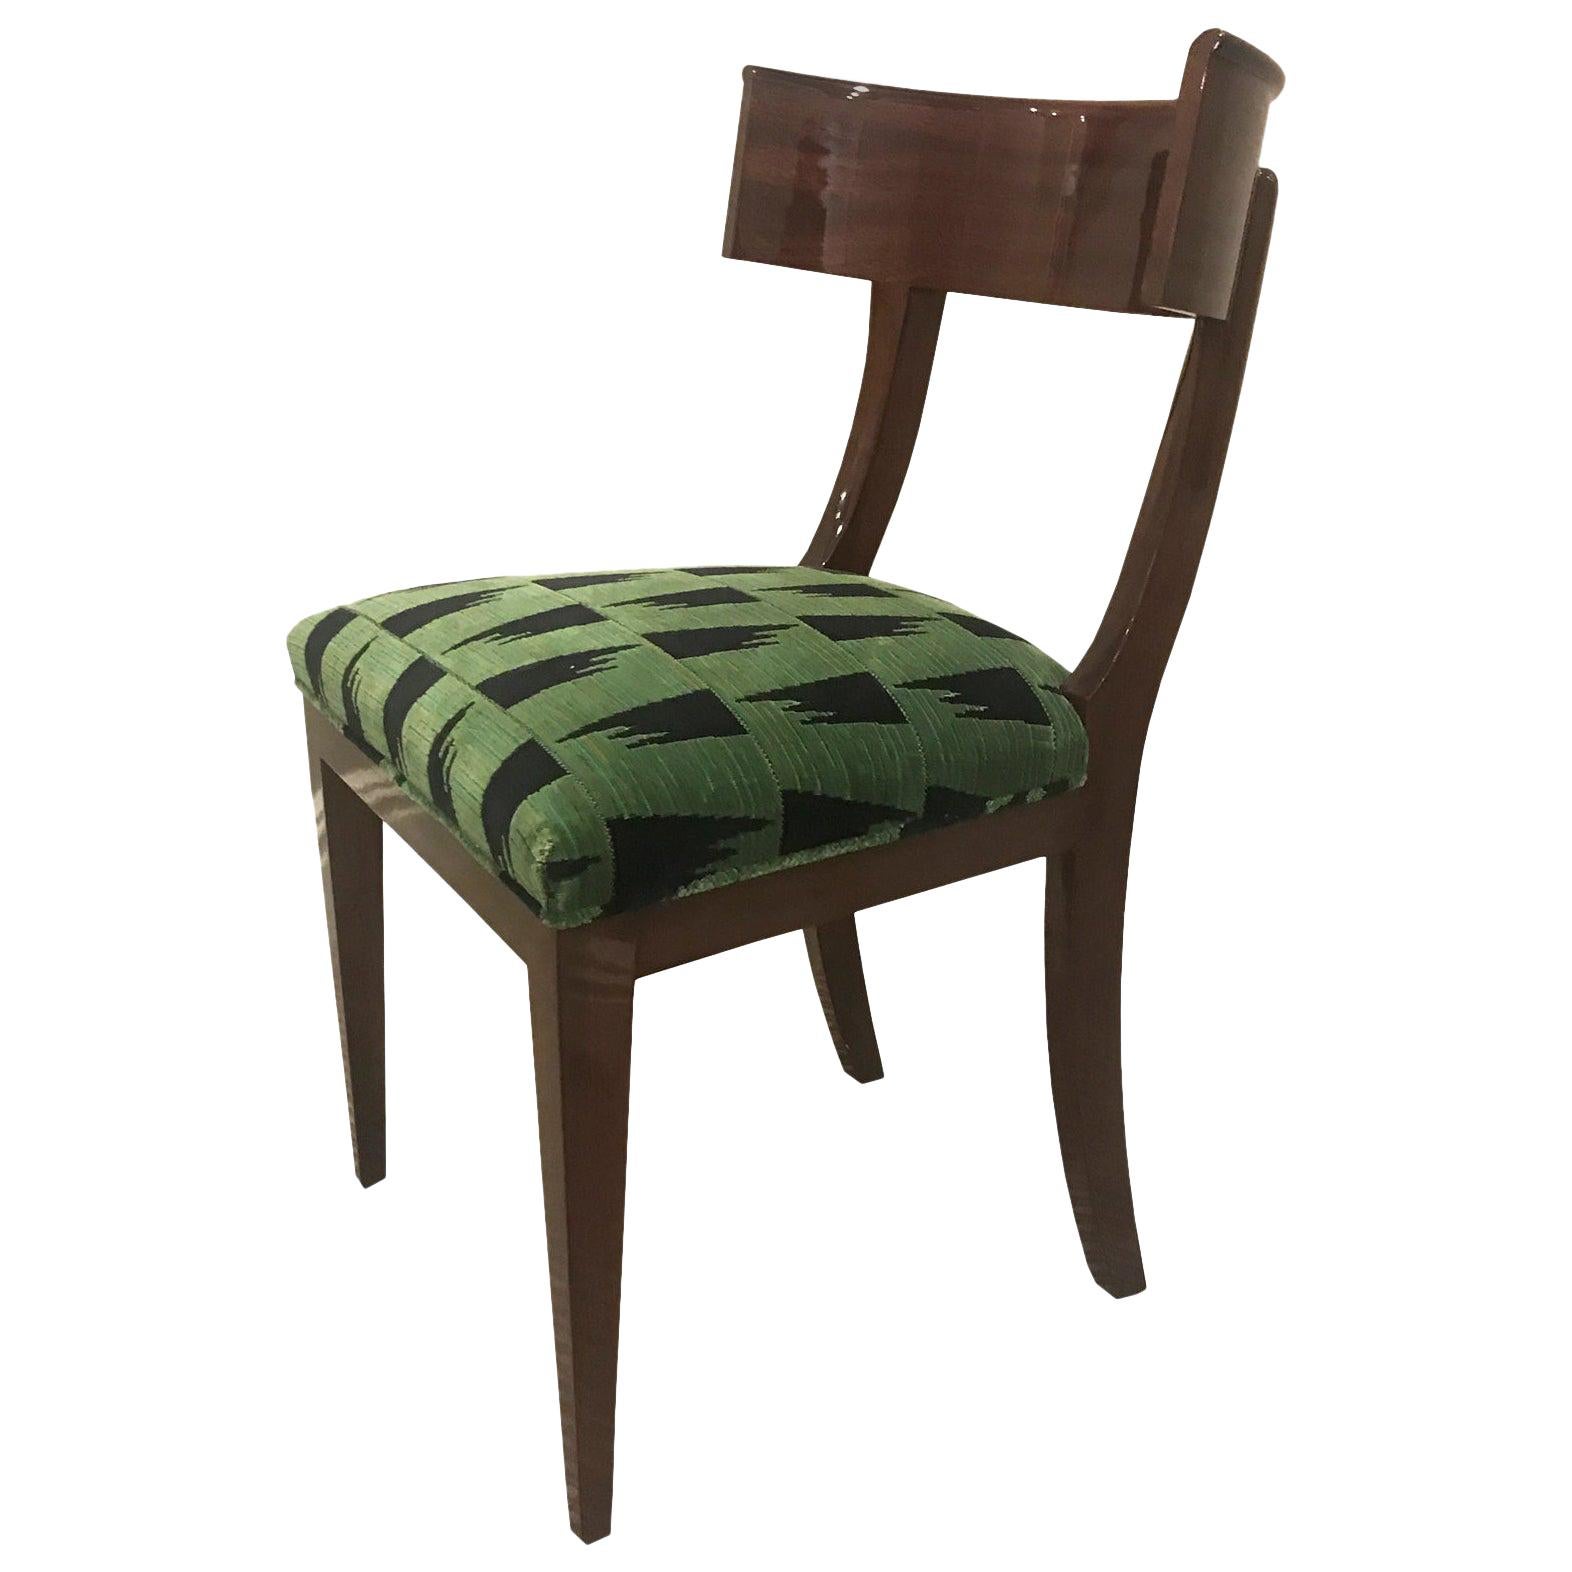 Contemporary Mahogany Klismos Dining Chair with Green Upholstery For Sale